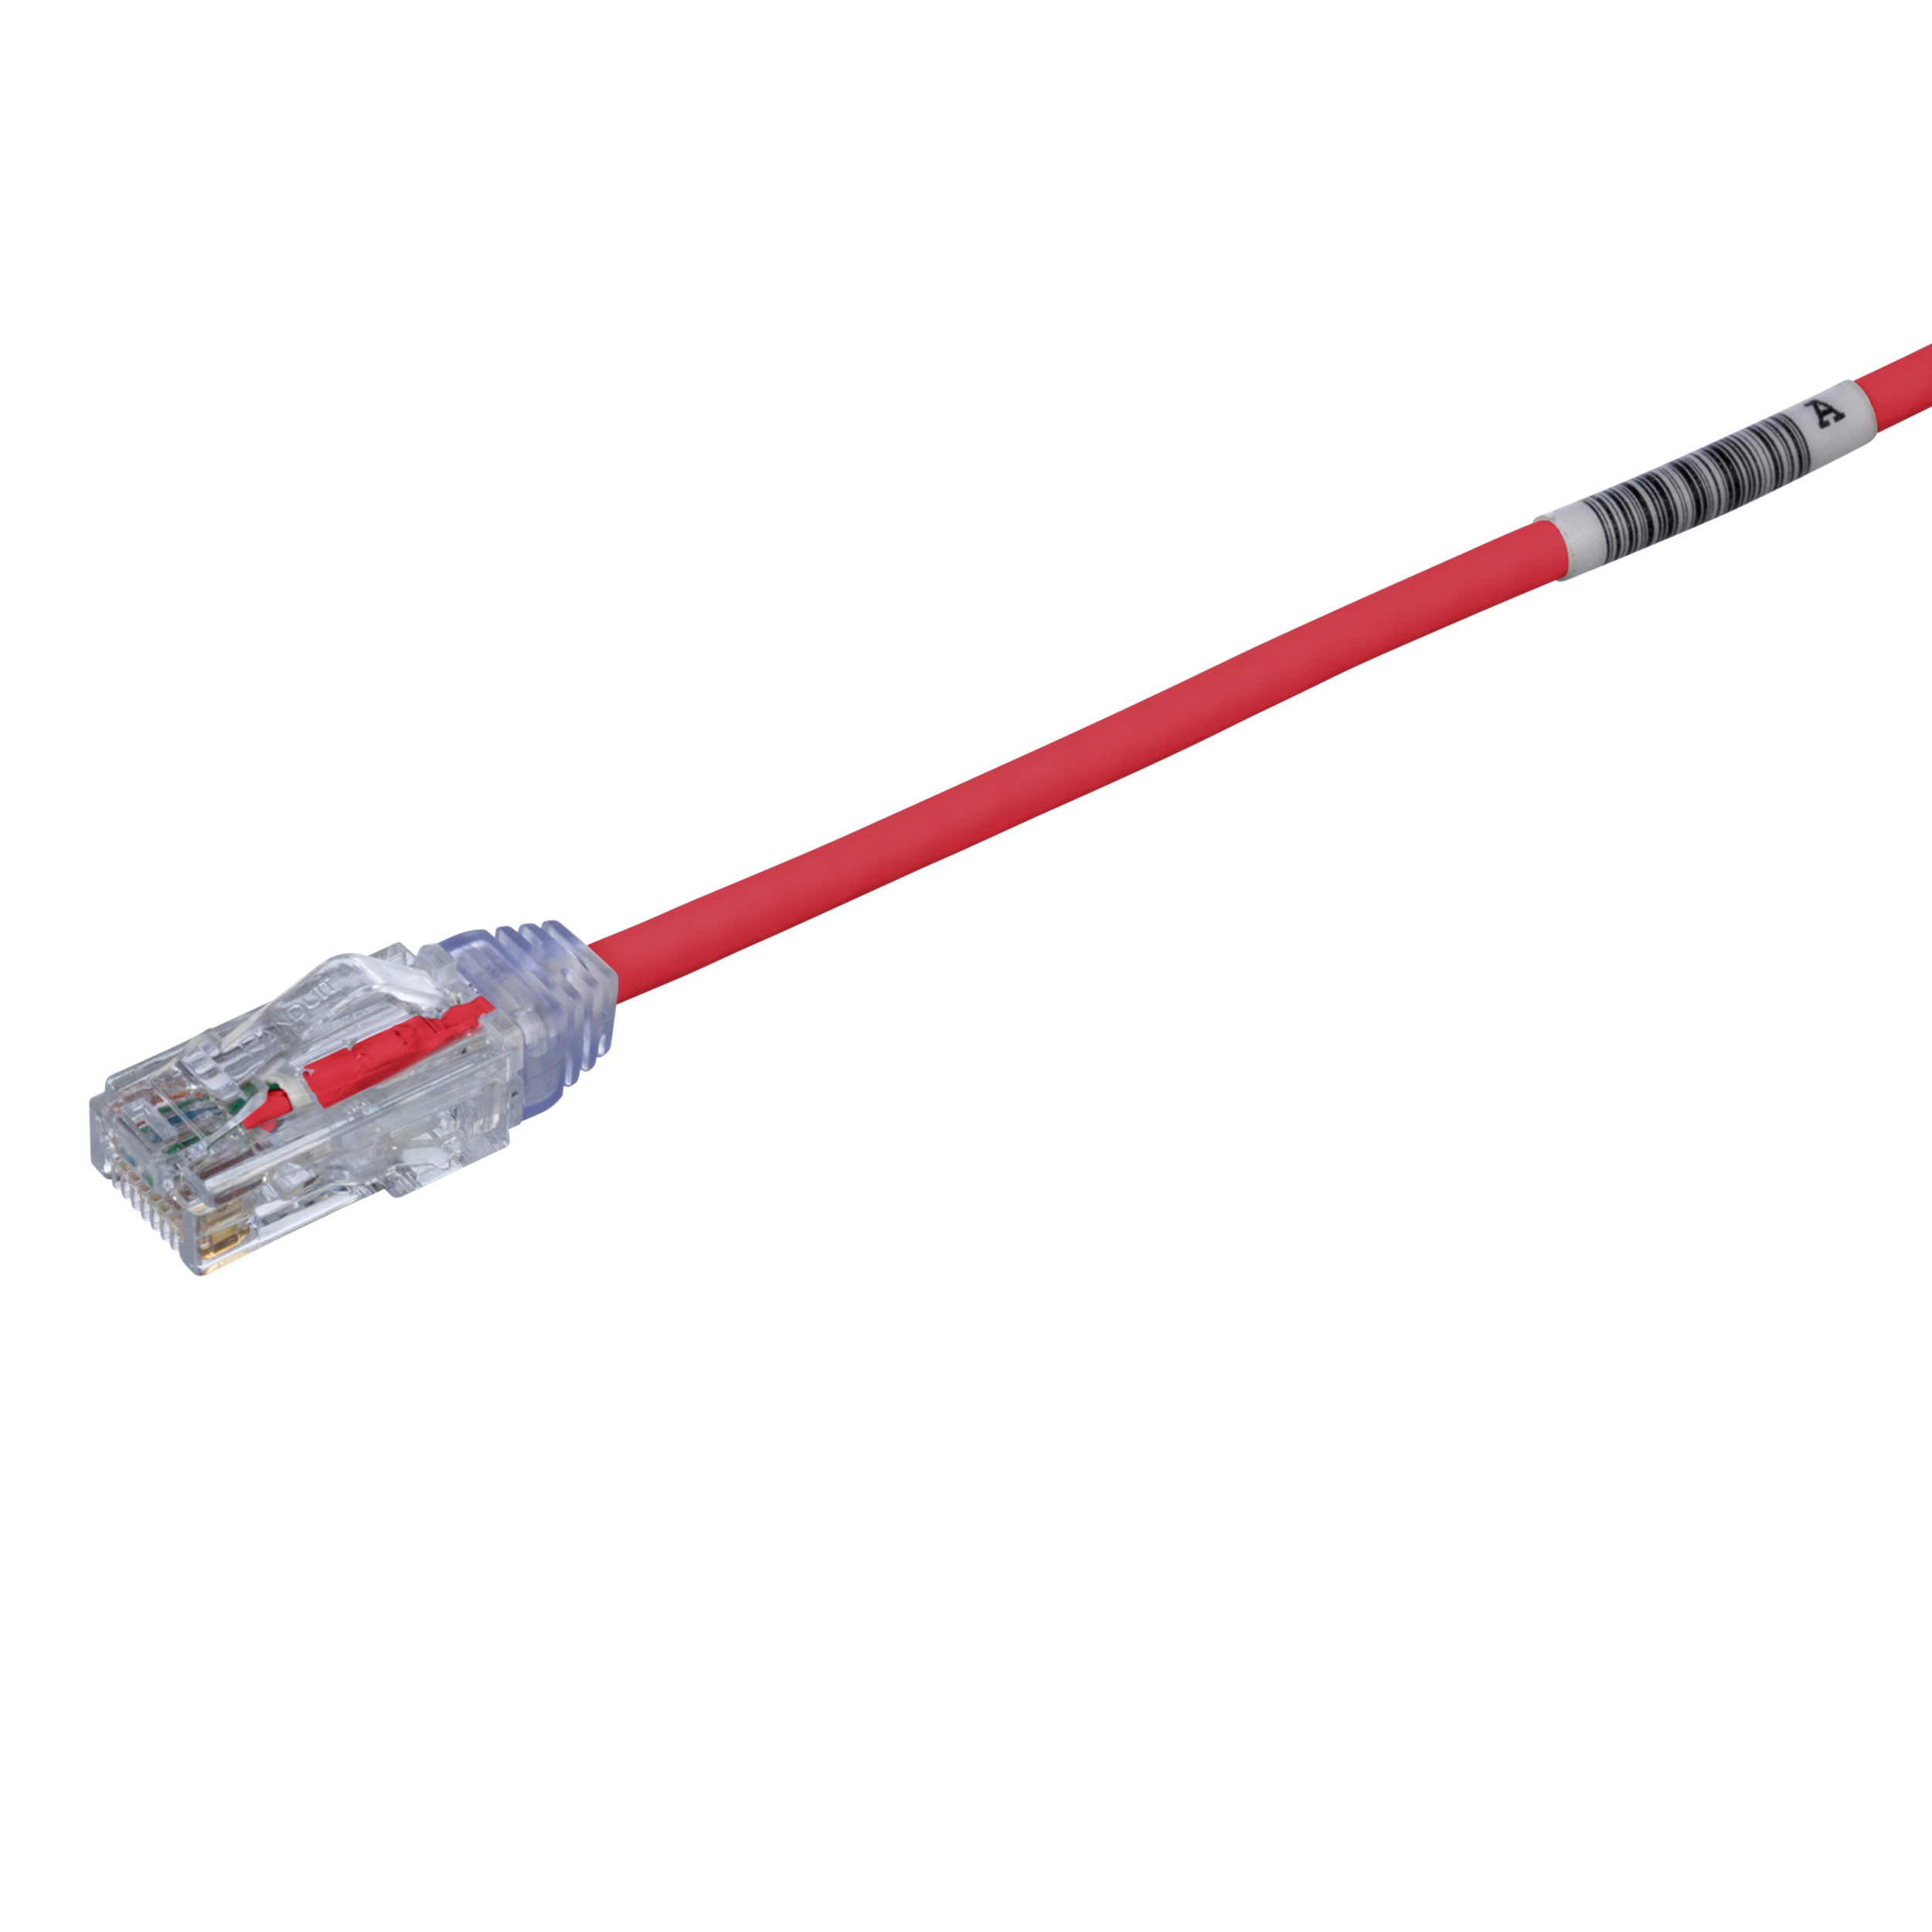 Cat 6 28 AWG UTP Copper Patch Cord, 2 ft, Red